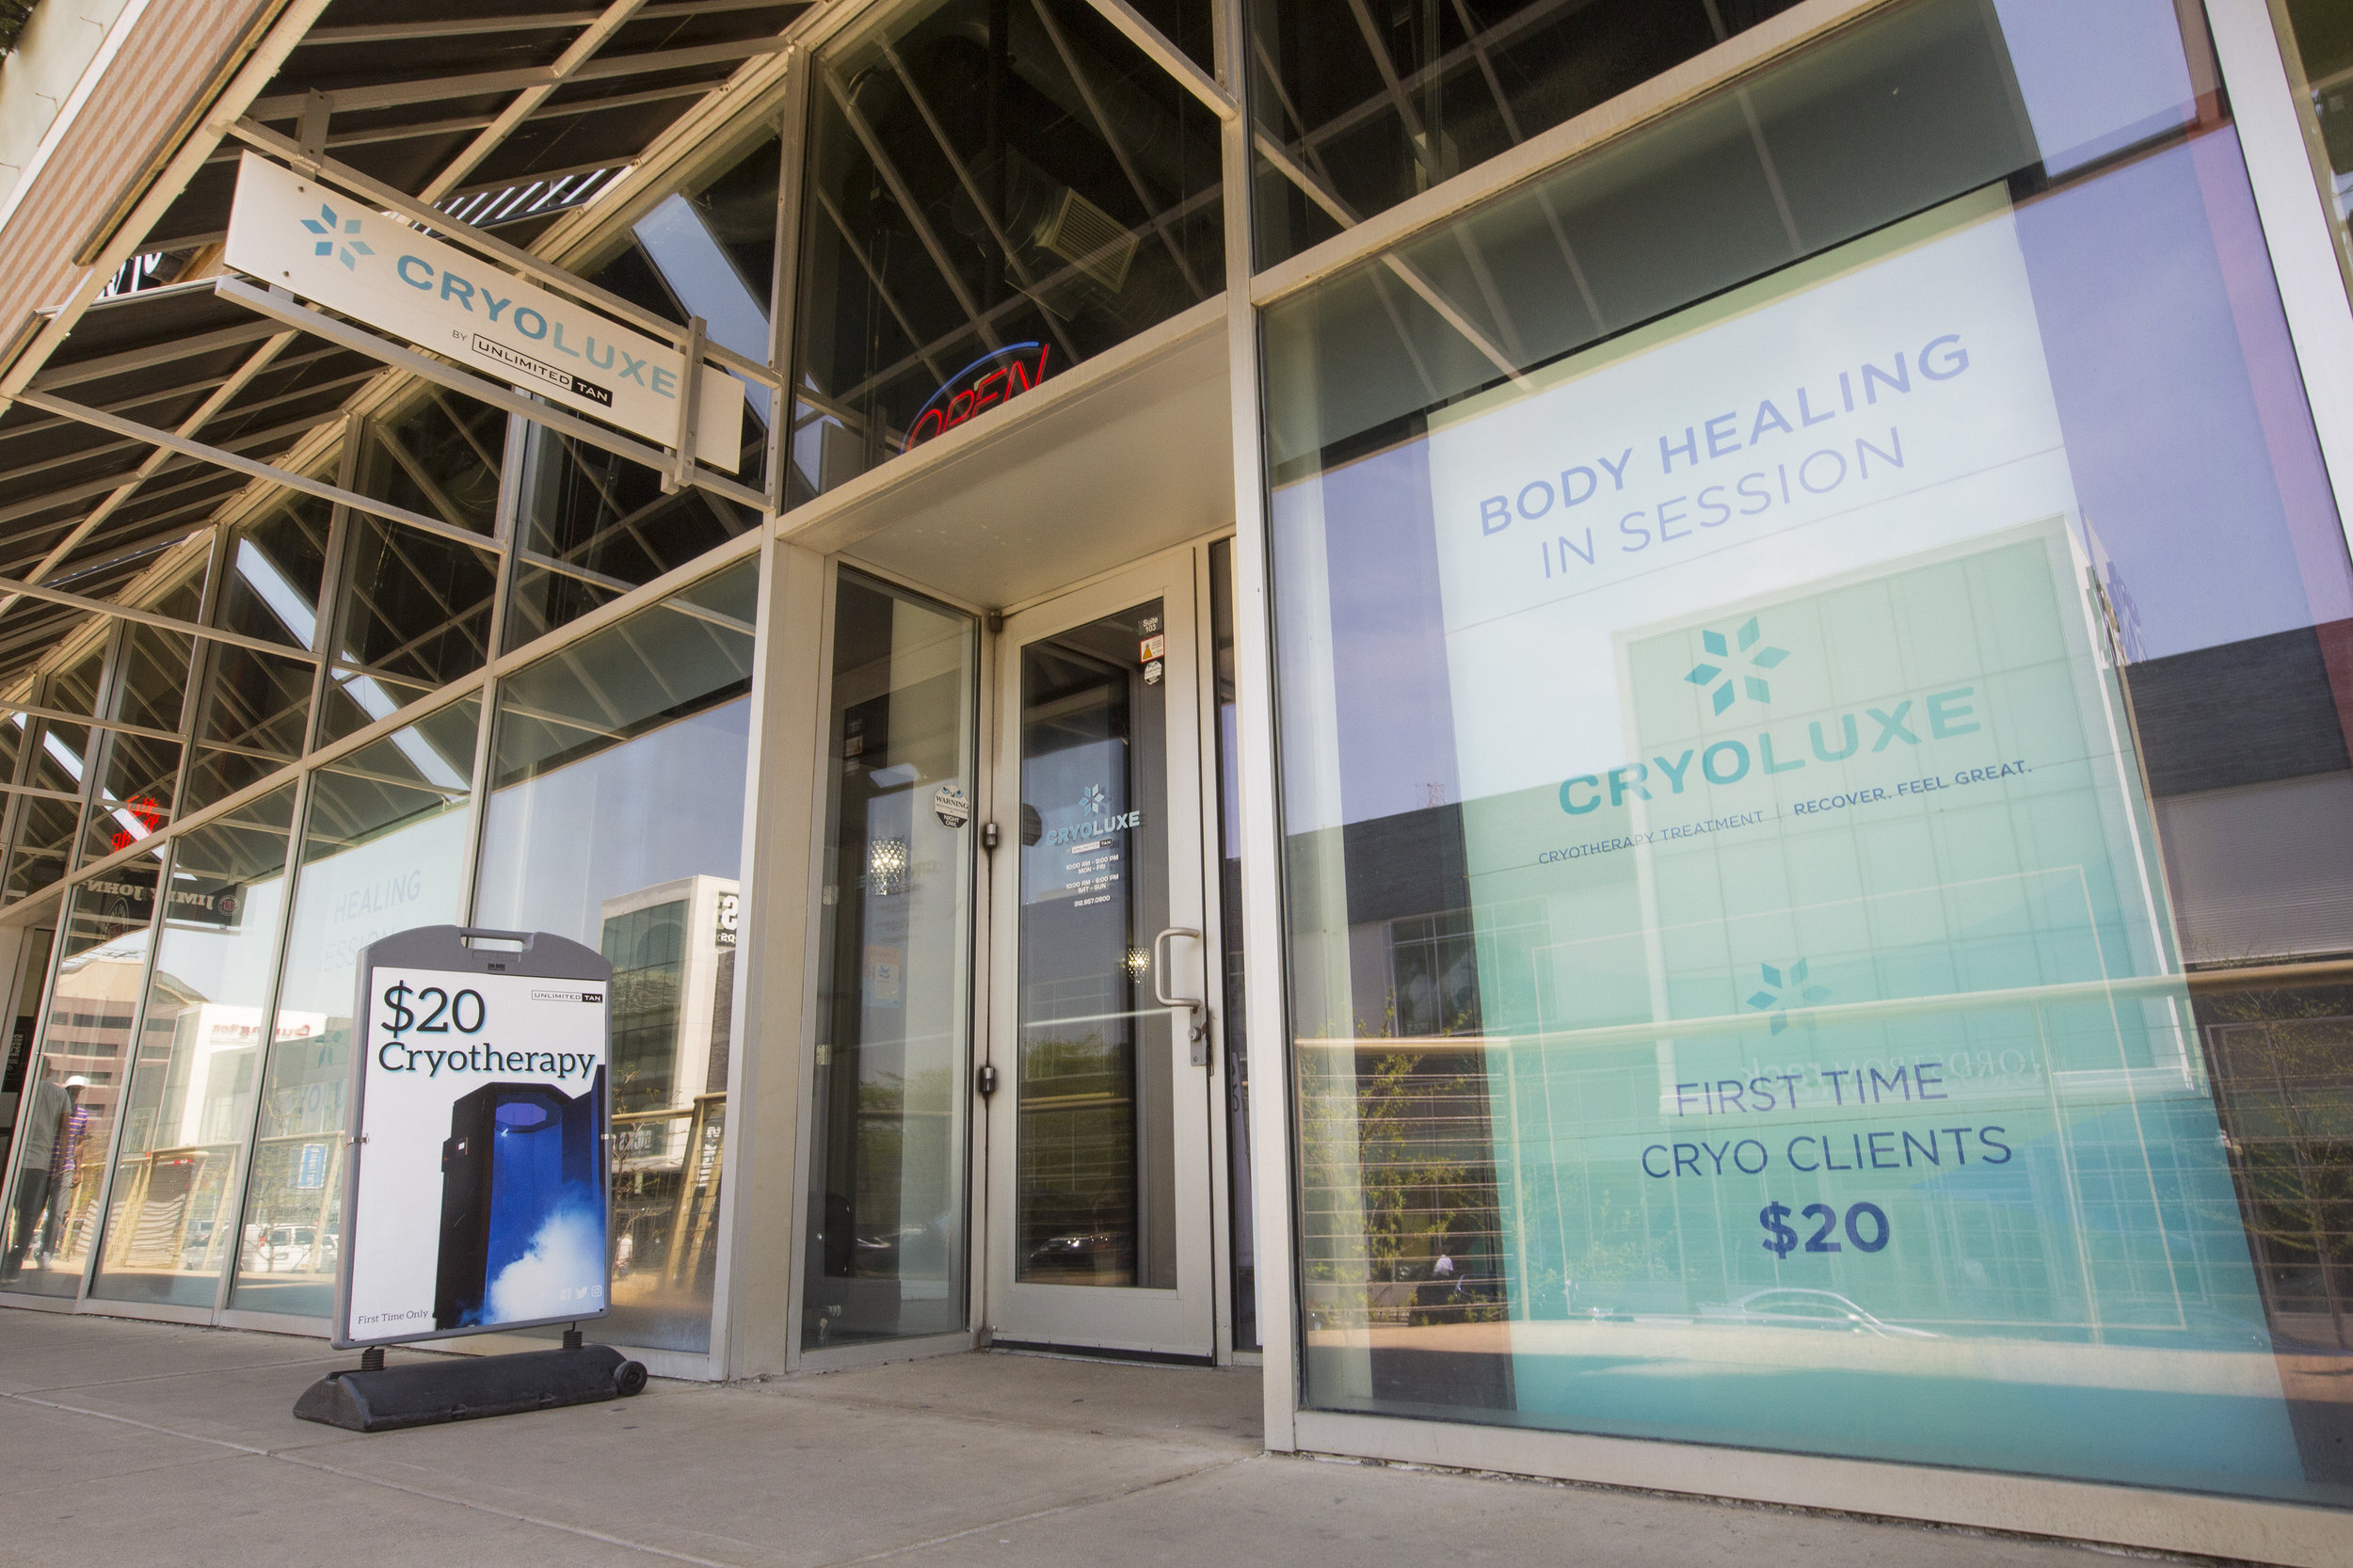 Cryoluxe cryotherapy in Chicago